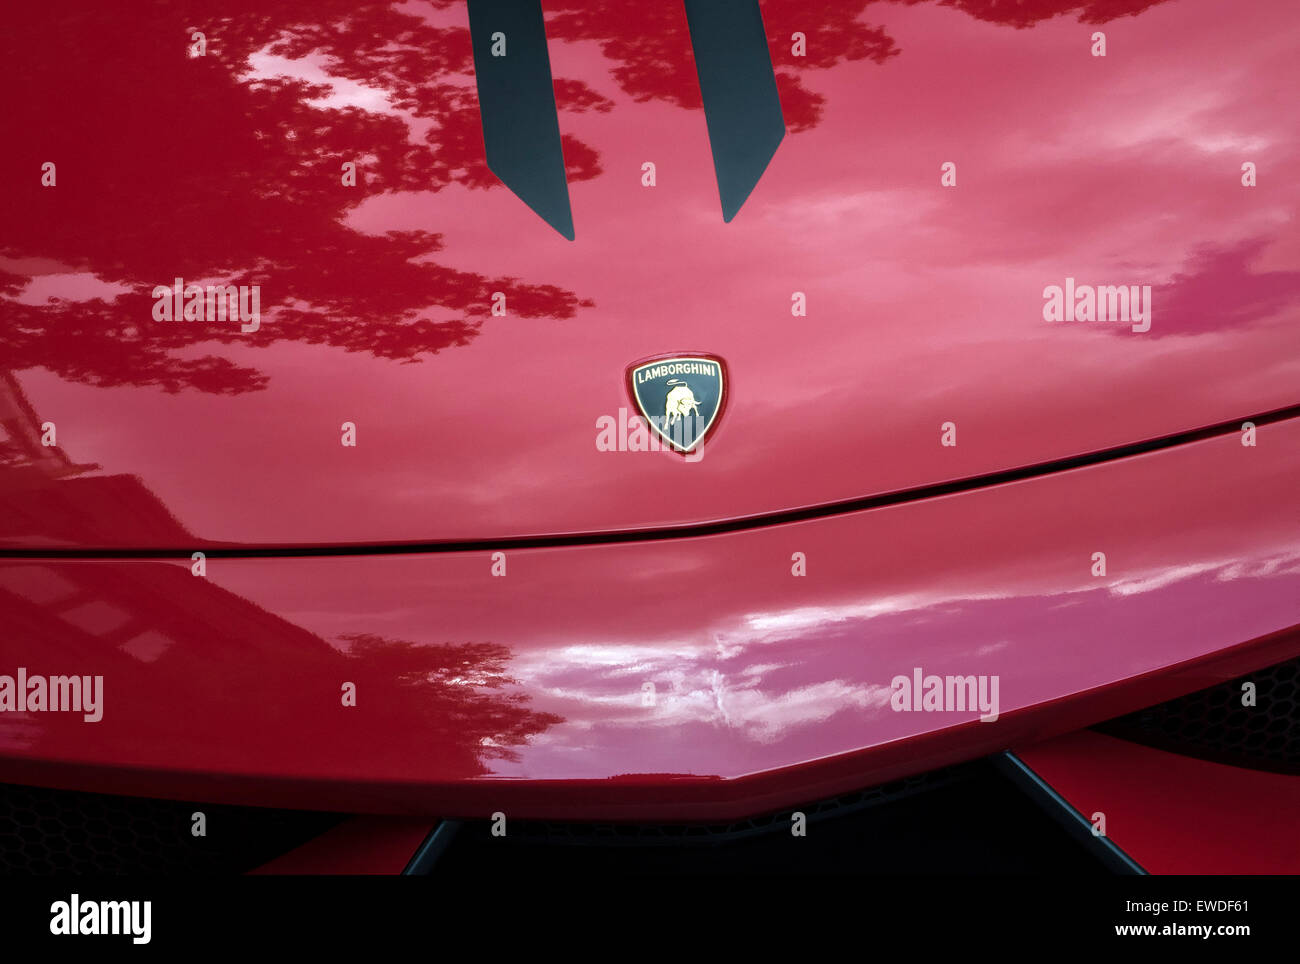 Detail of Red Lamborghini showing hood and logo and black strips Stock Photo